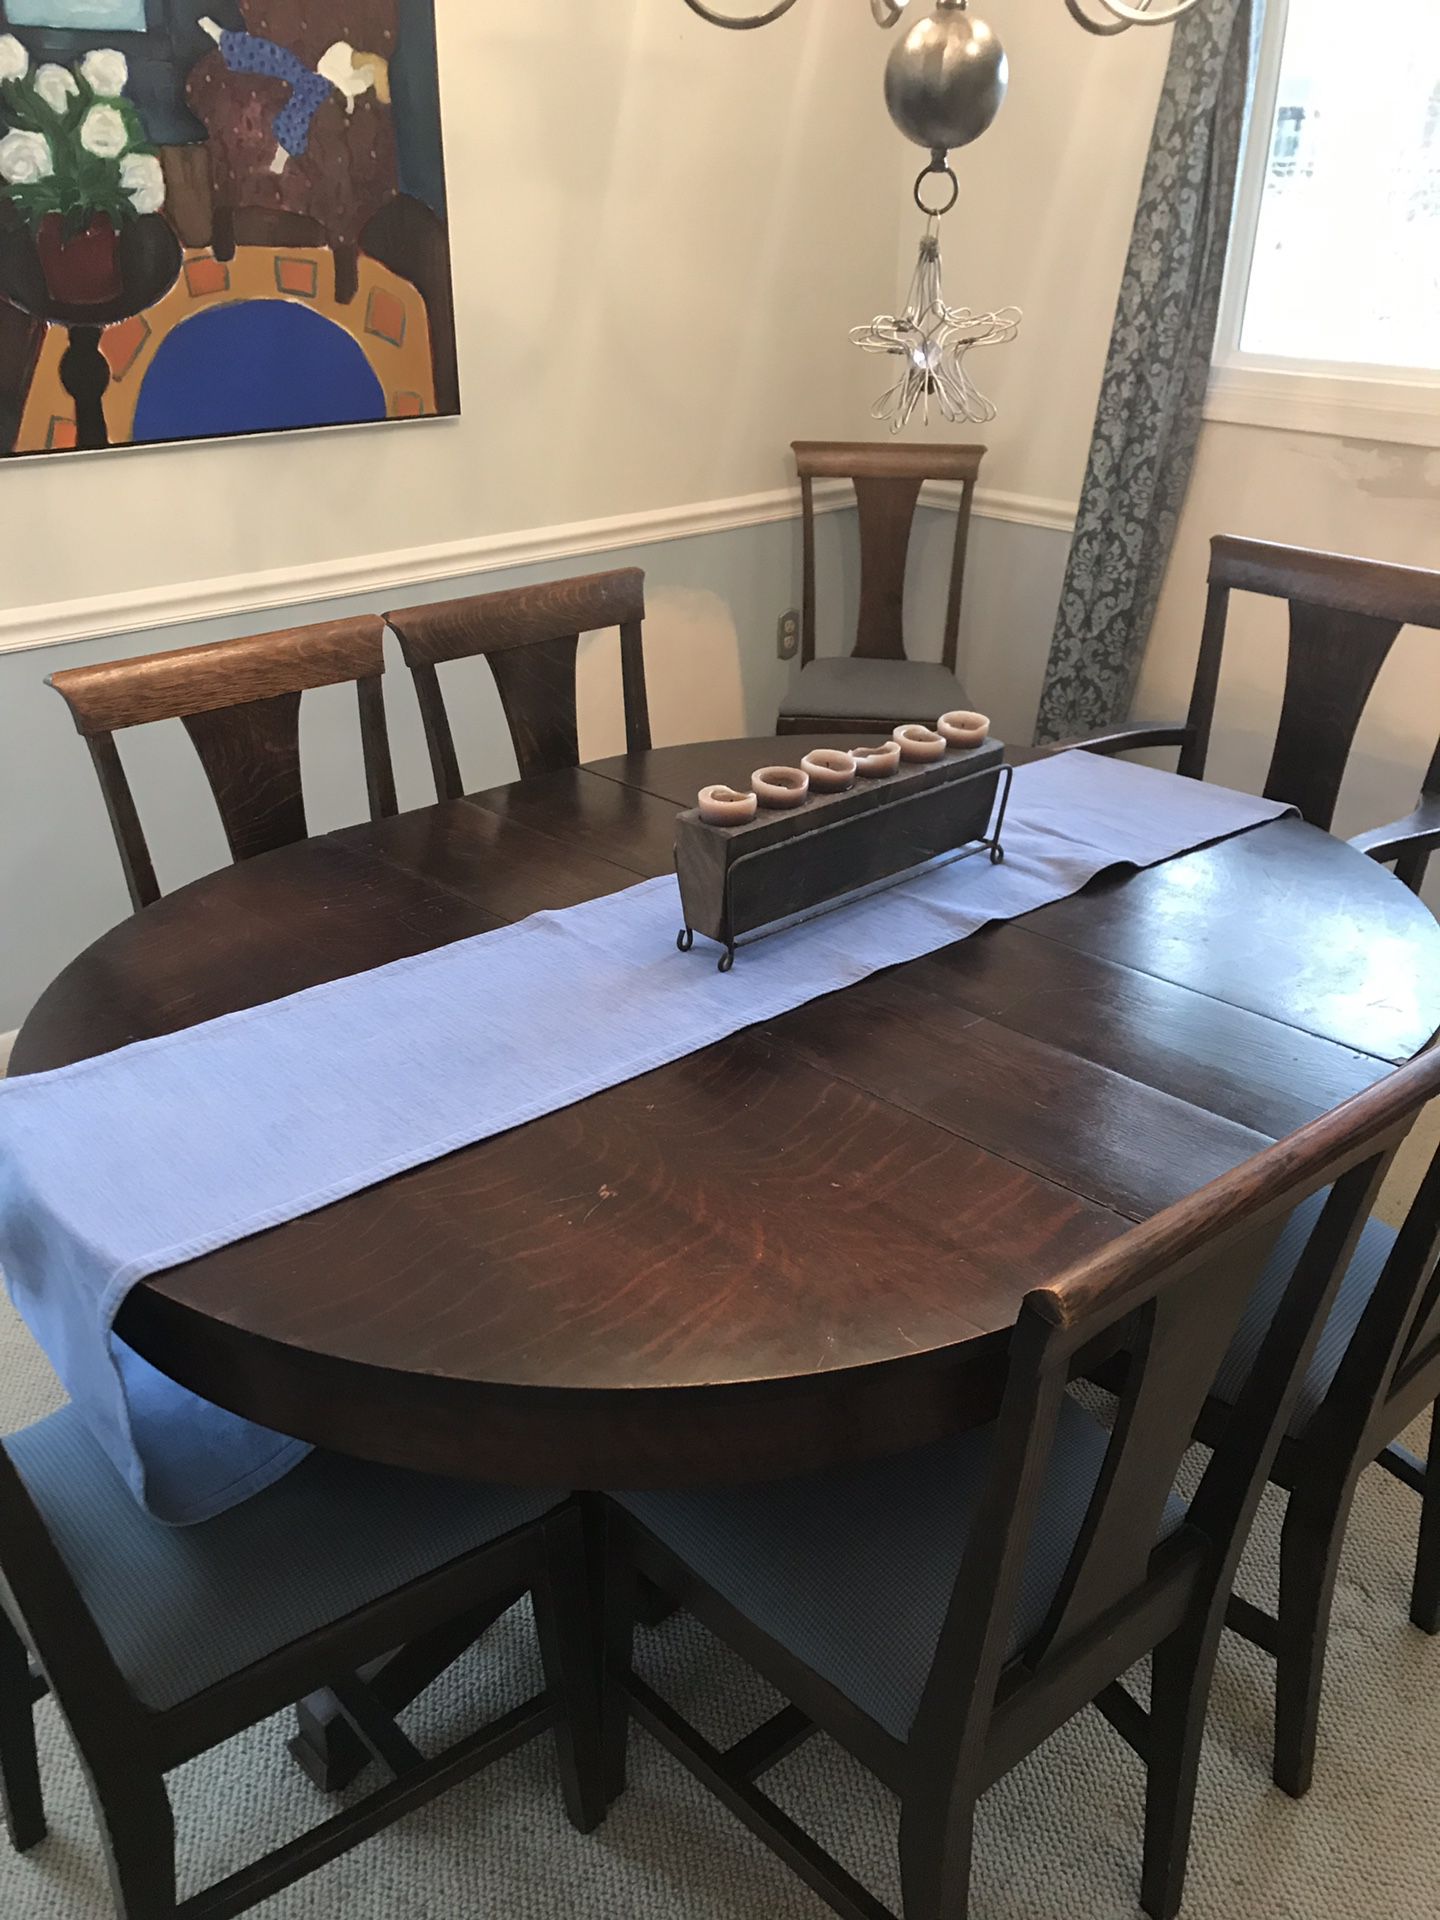 Antique oak table with 8 chairs expand to 76” table with 3 leafs